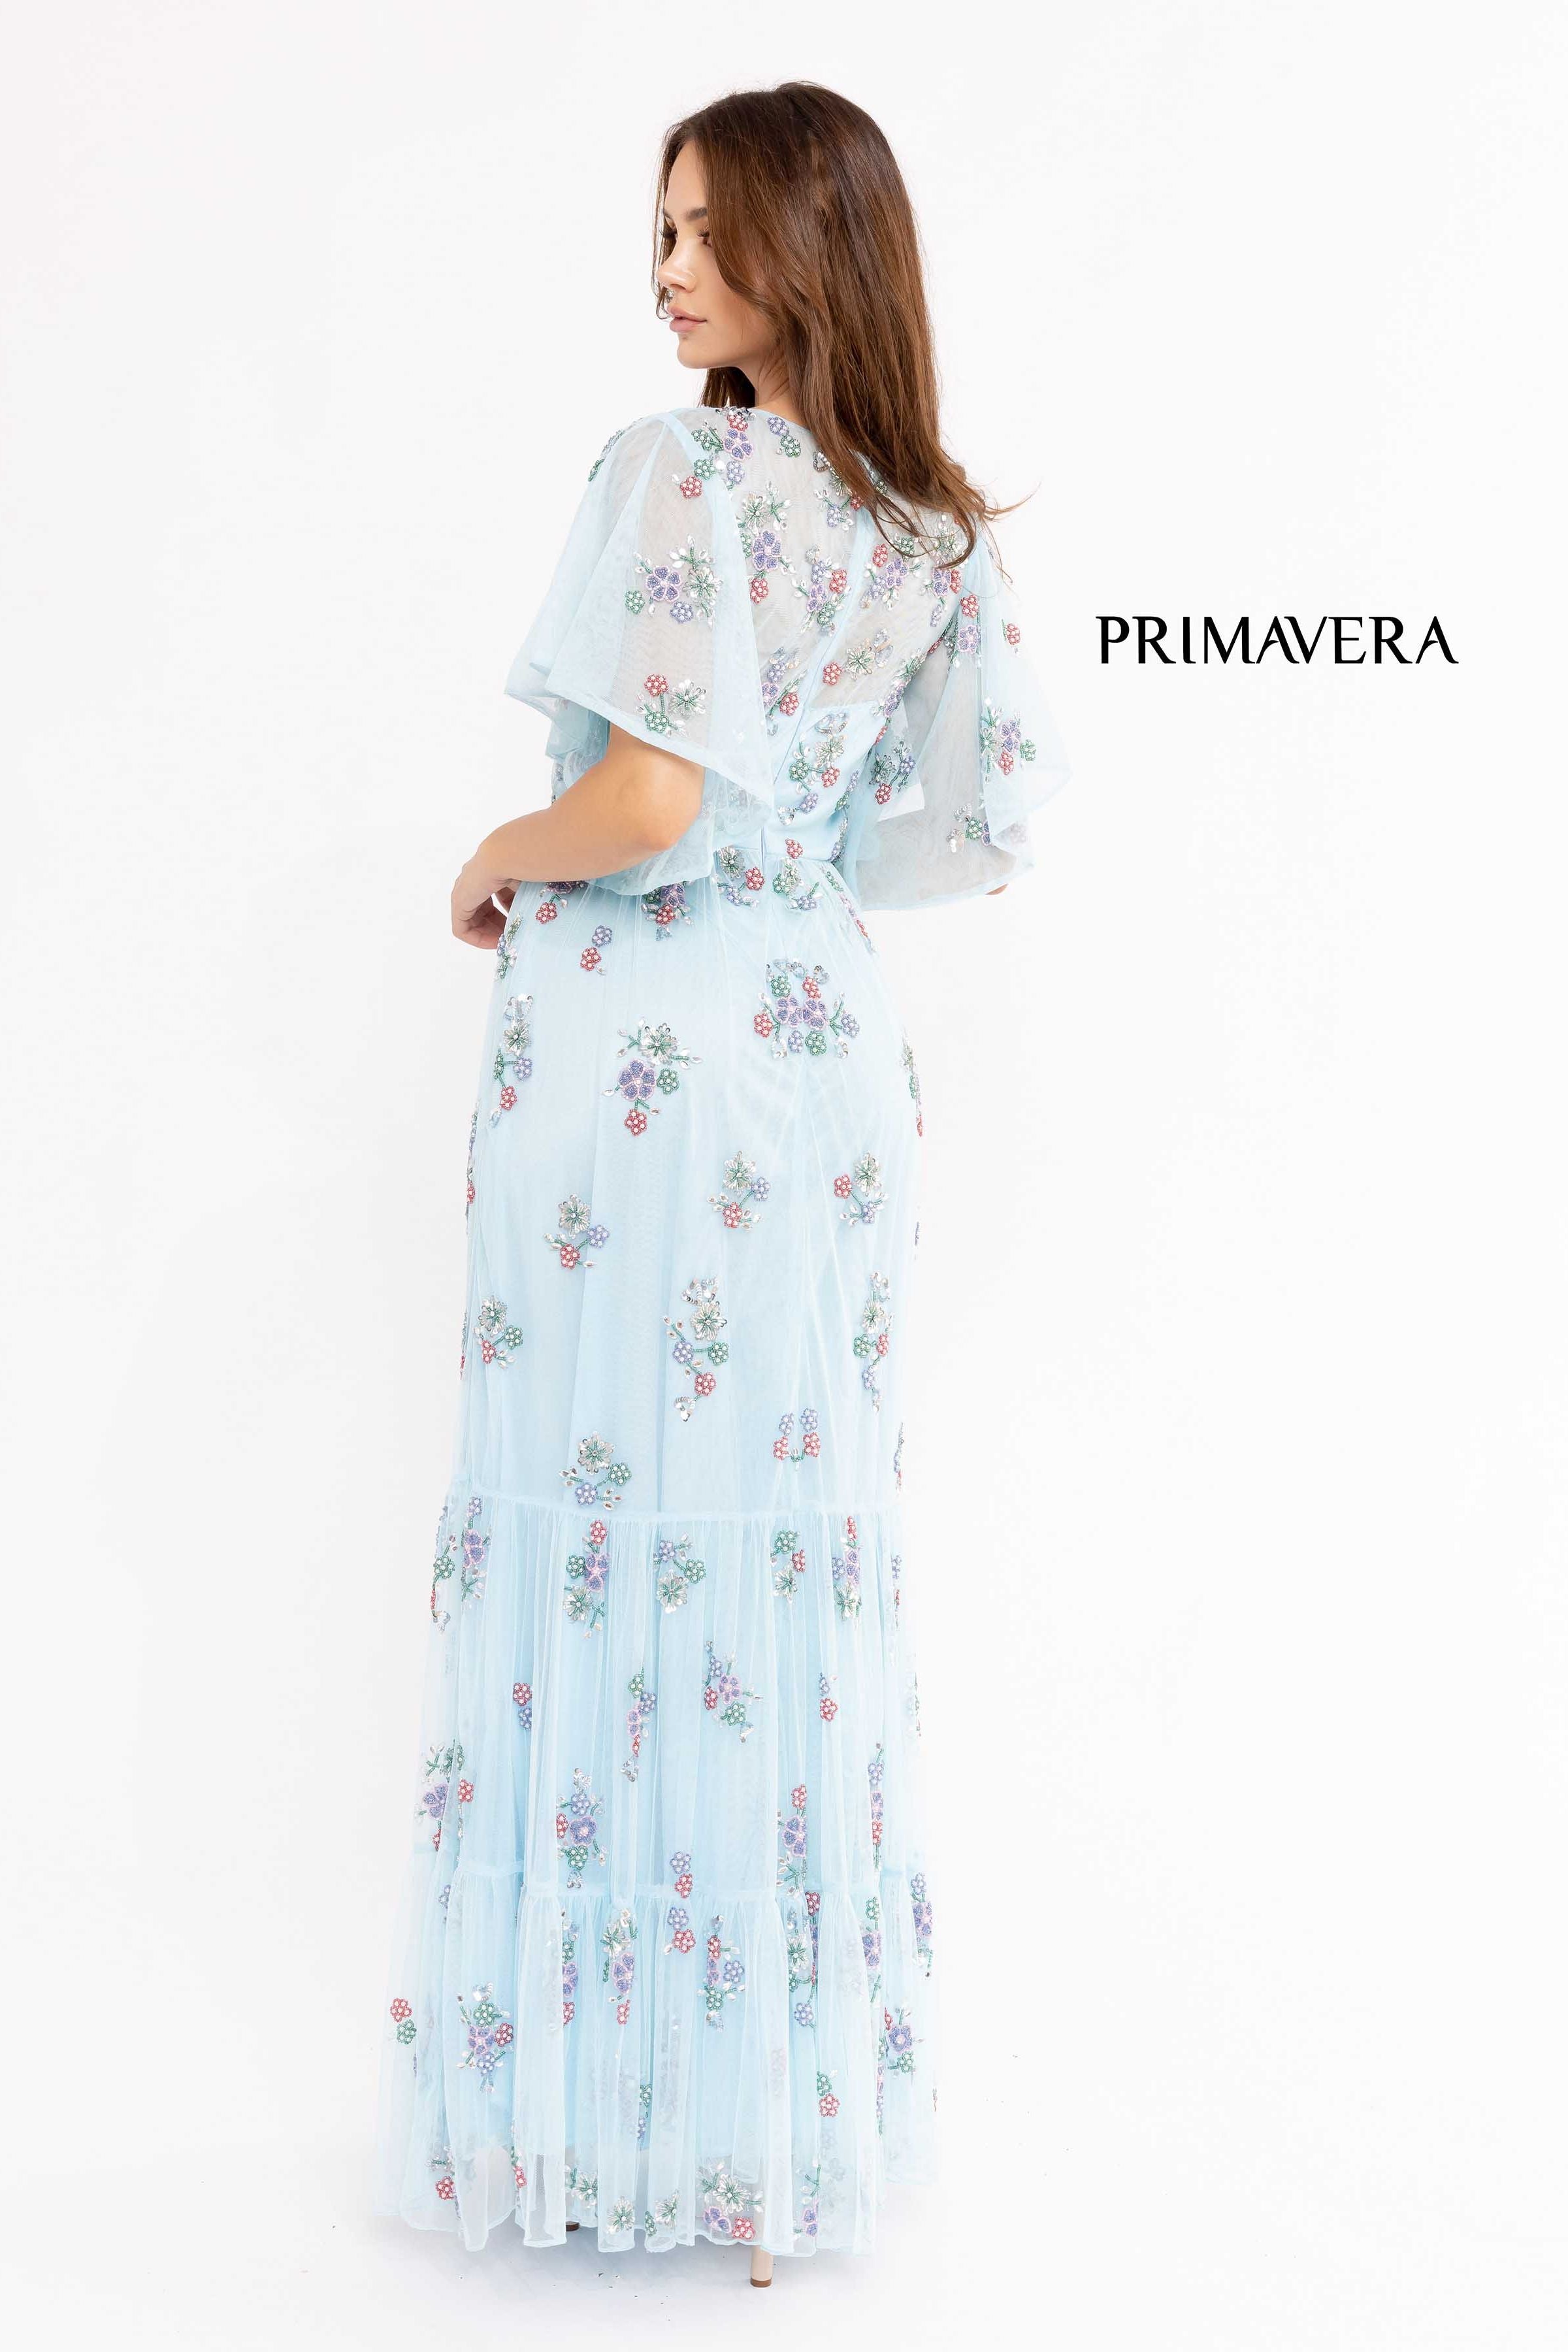 Soft-Looking Floral Long Dress By Primavera Couture -13108